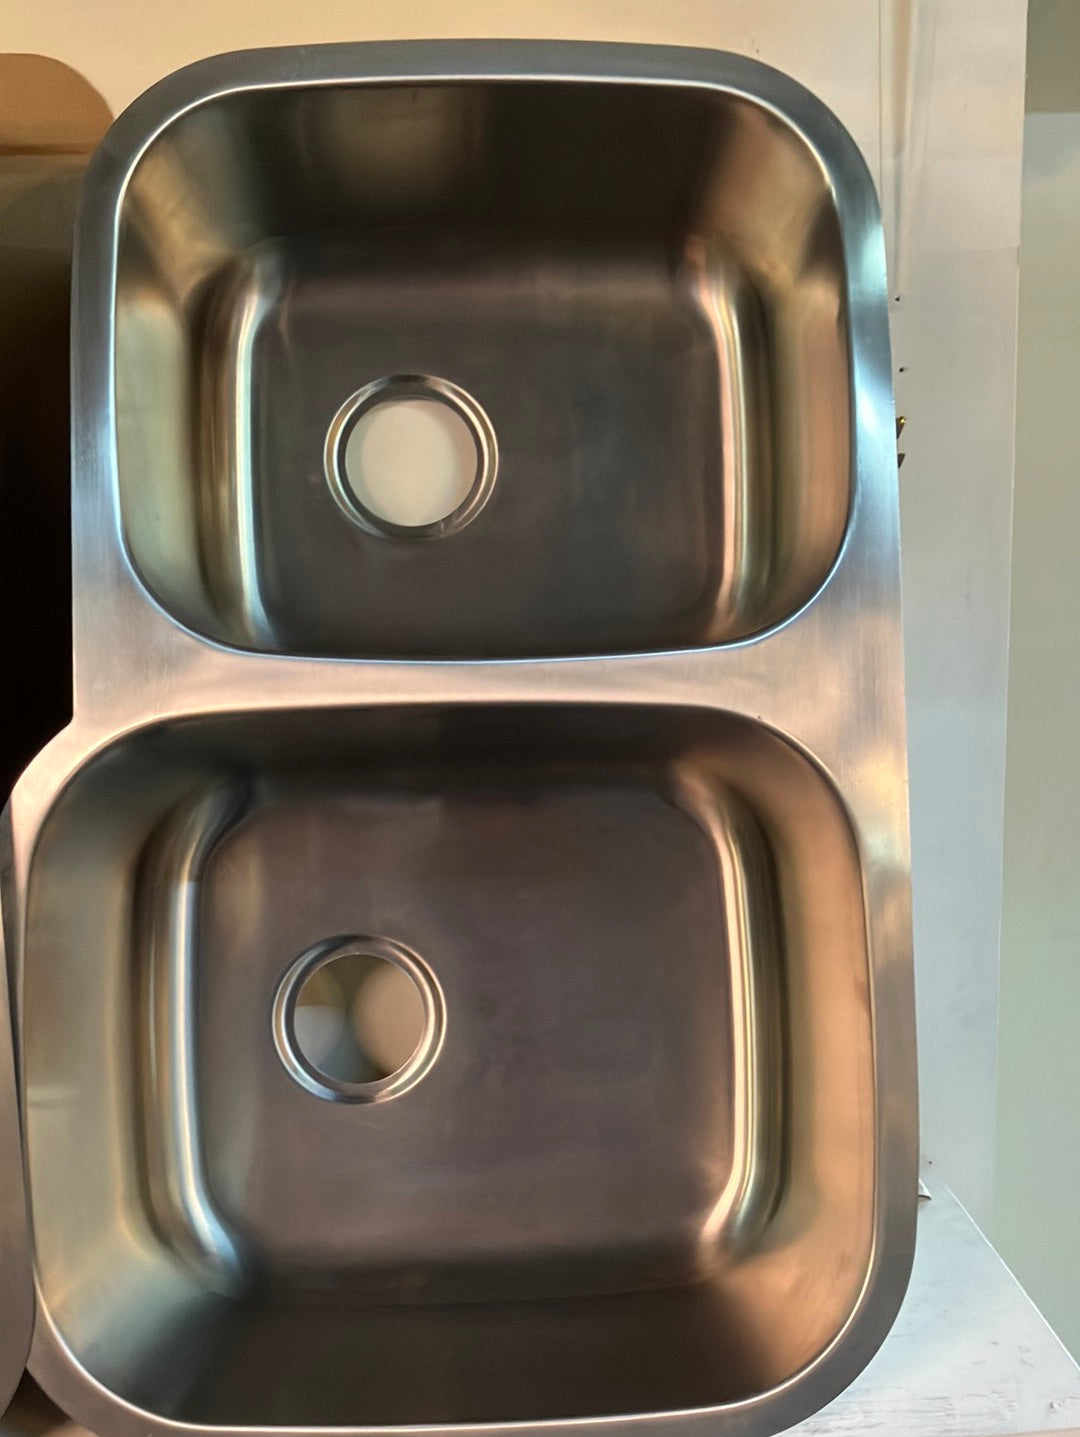 L AND J STAINLESS STEEL UNDERMOUNT SINK X 8.5"     32" X 20.5"